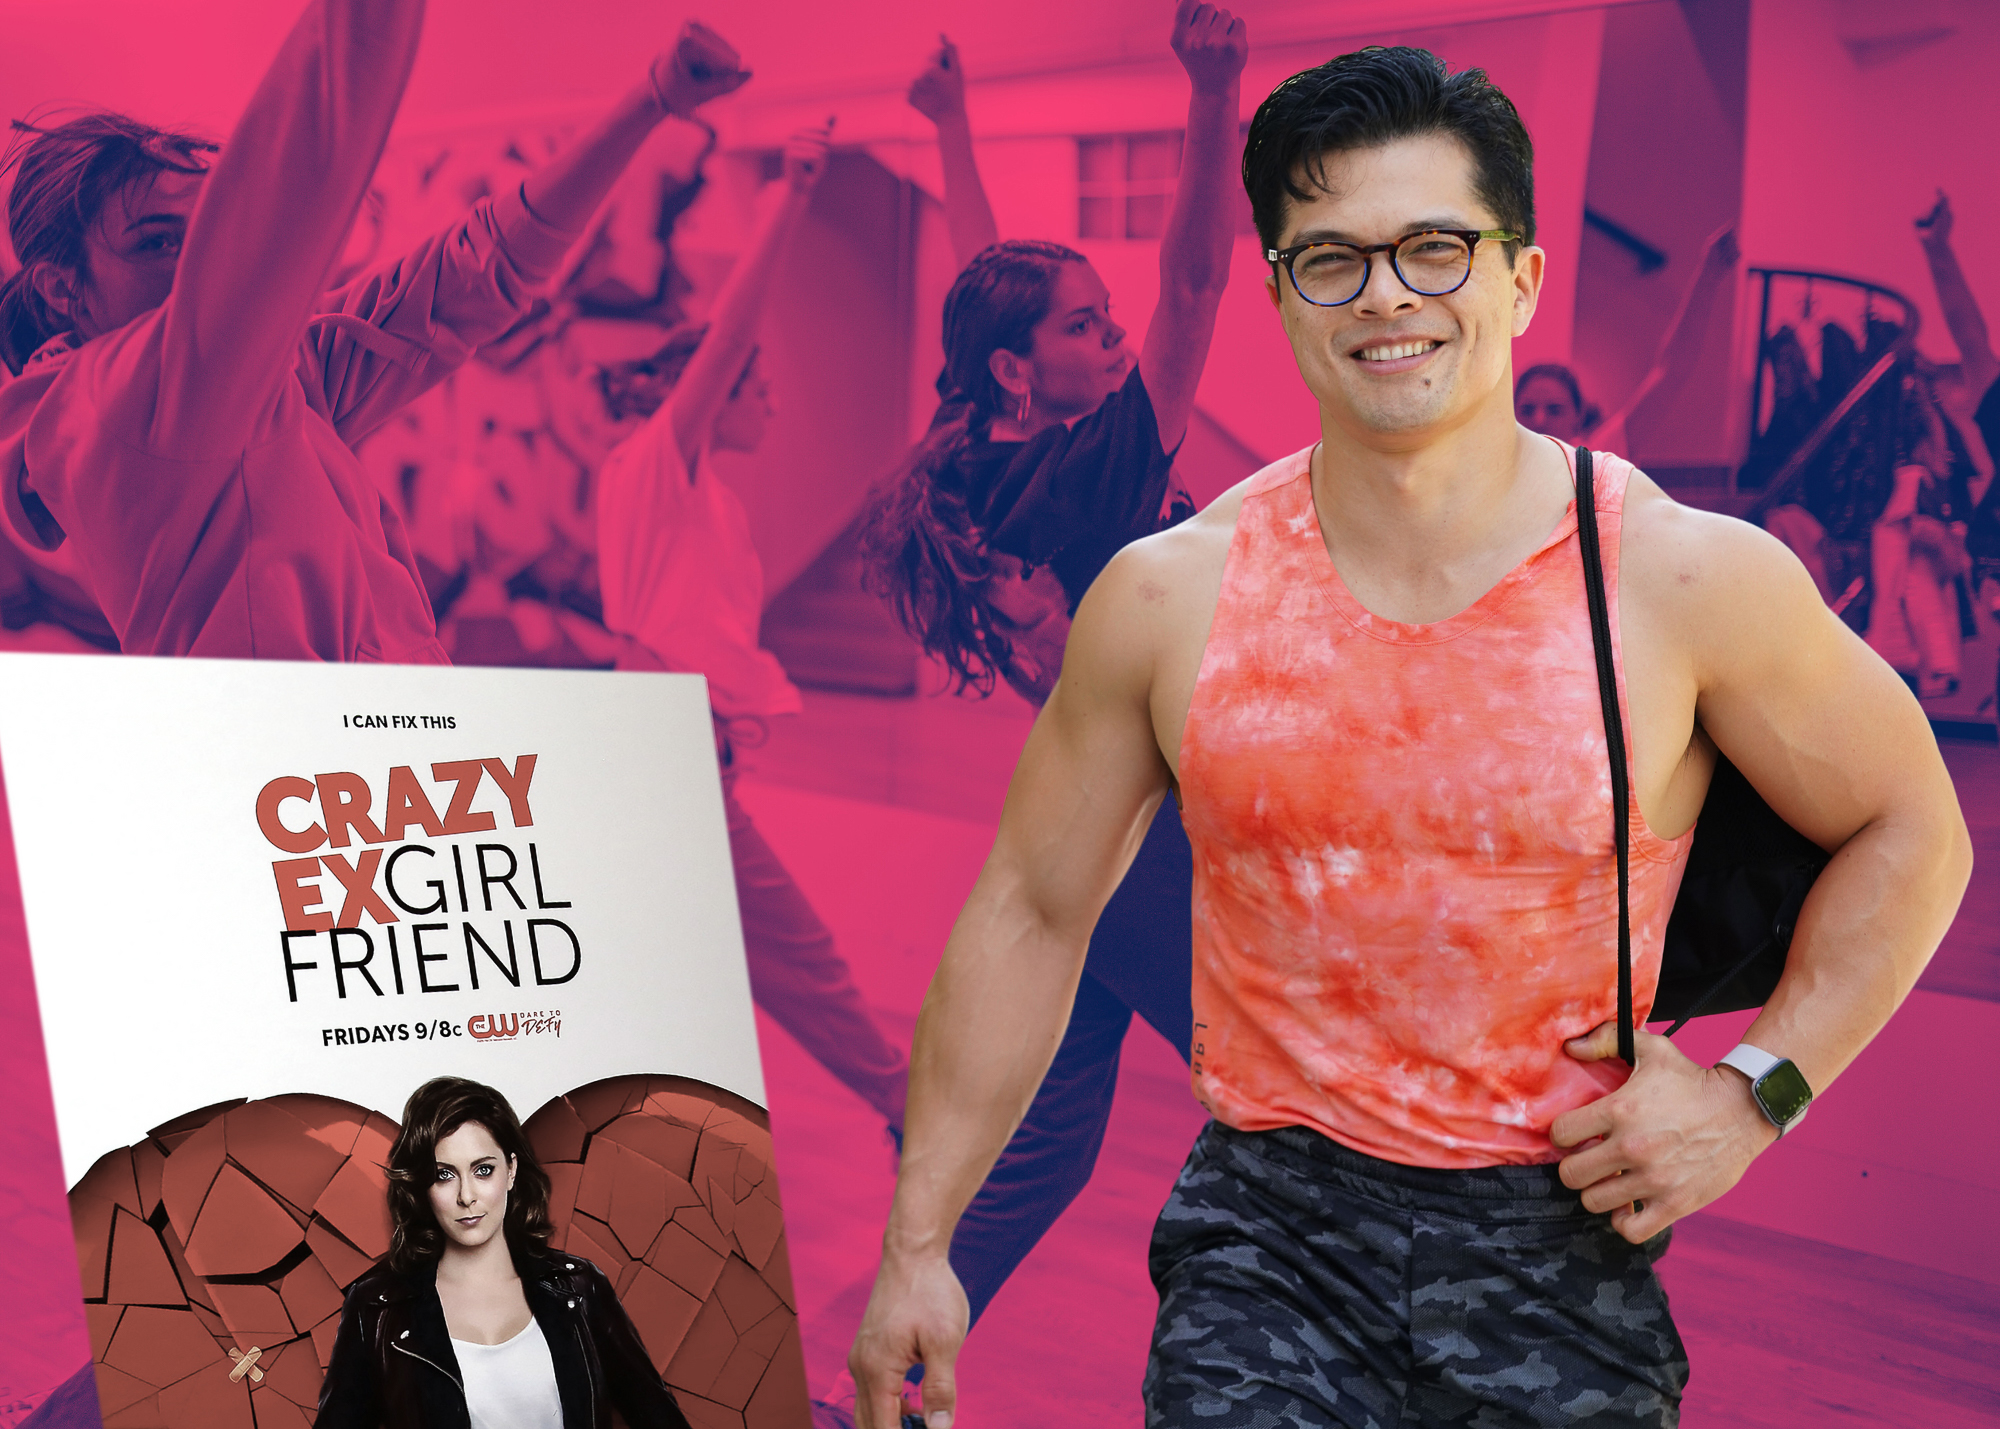 A man in a tie-dye tank top and fatigues-style pants, right, appears next to a poster for "Crazy Ex-Girlfriend."